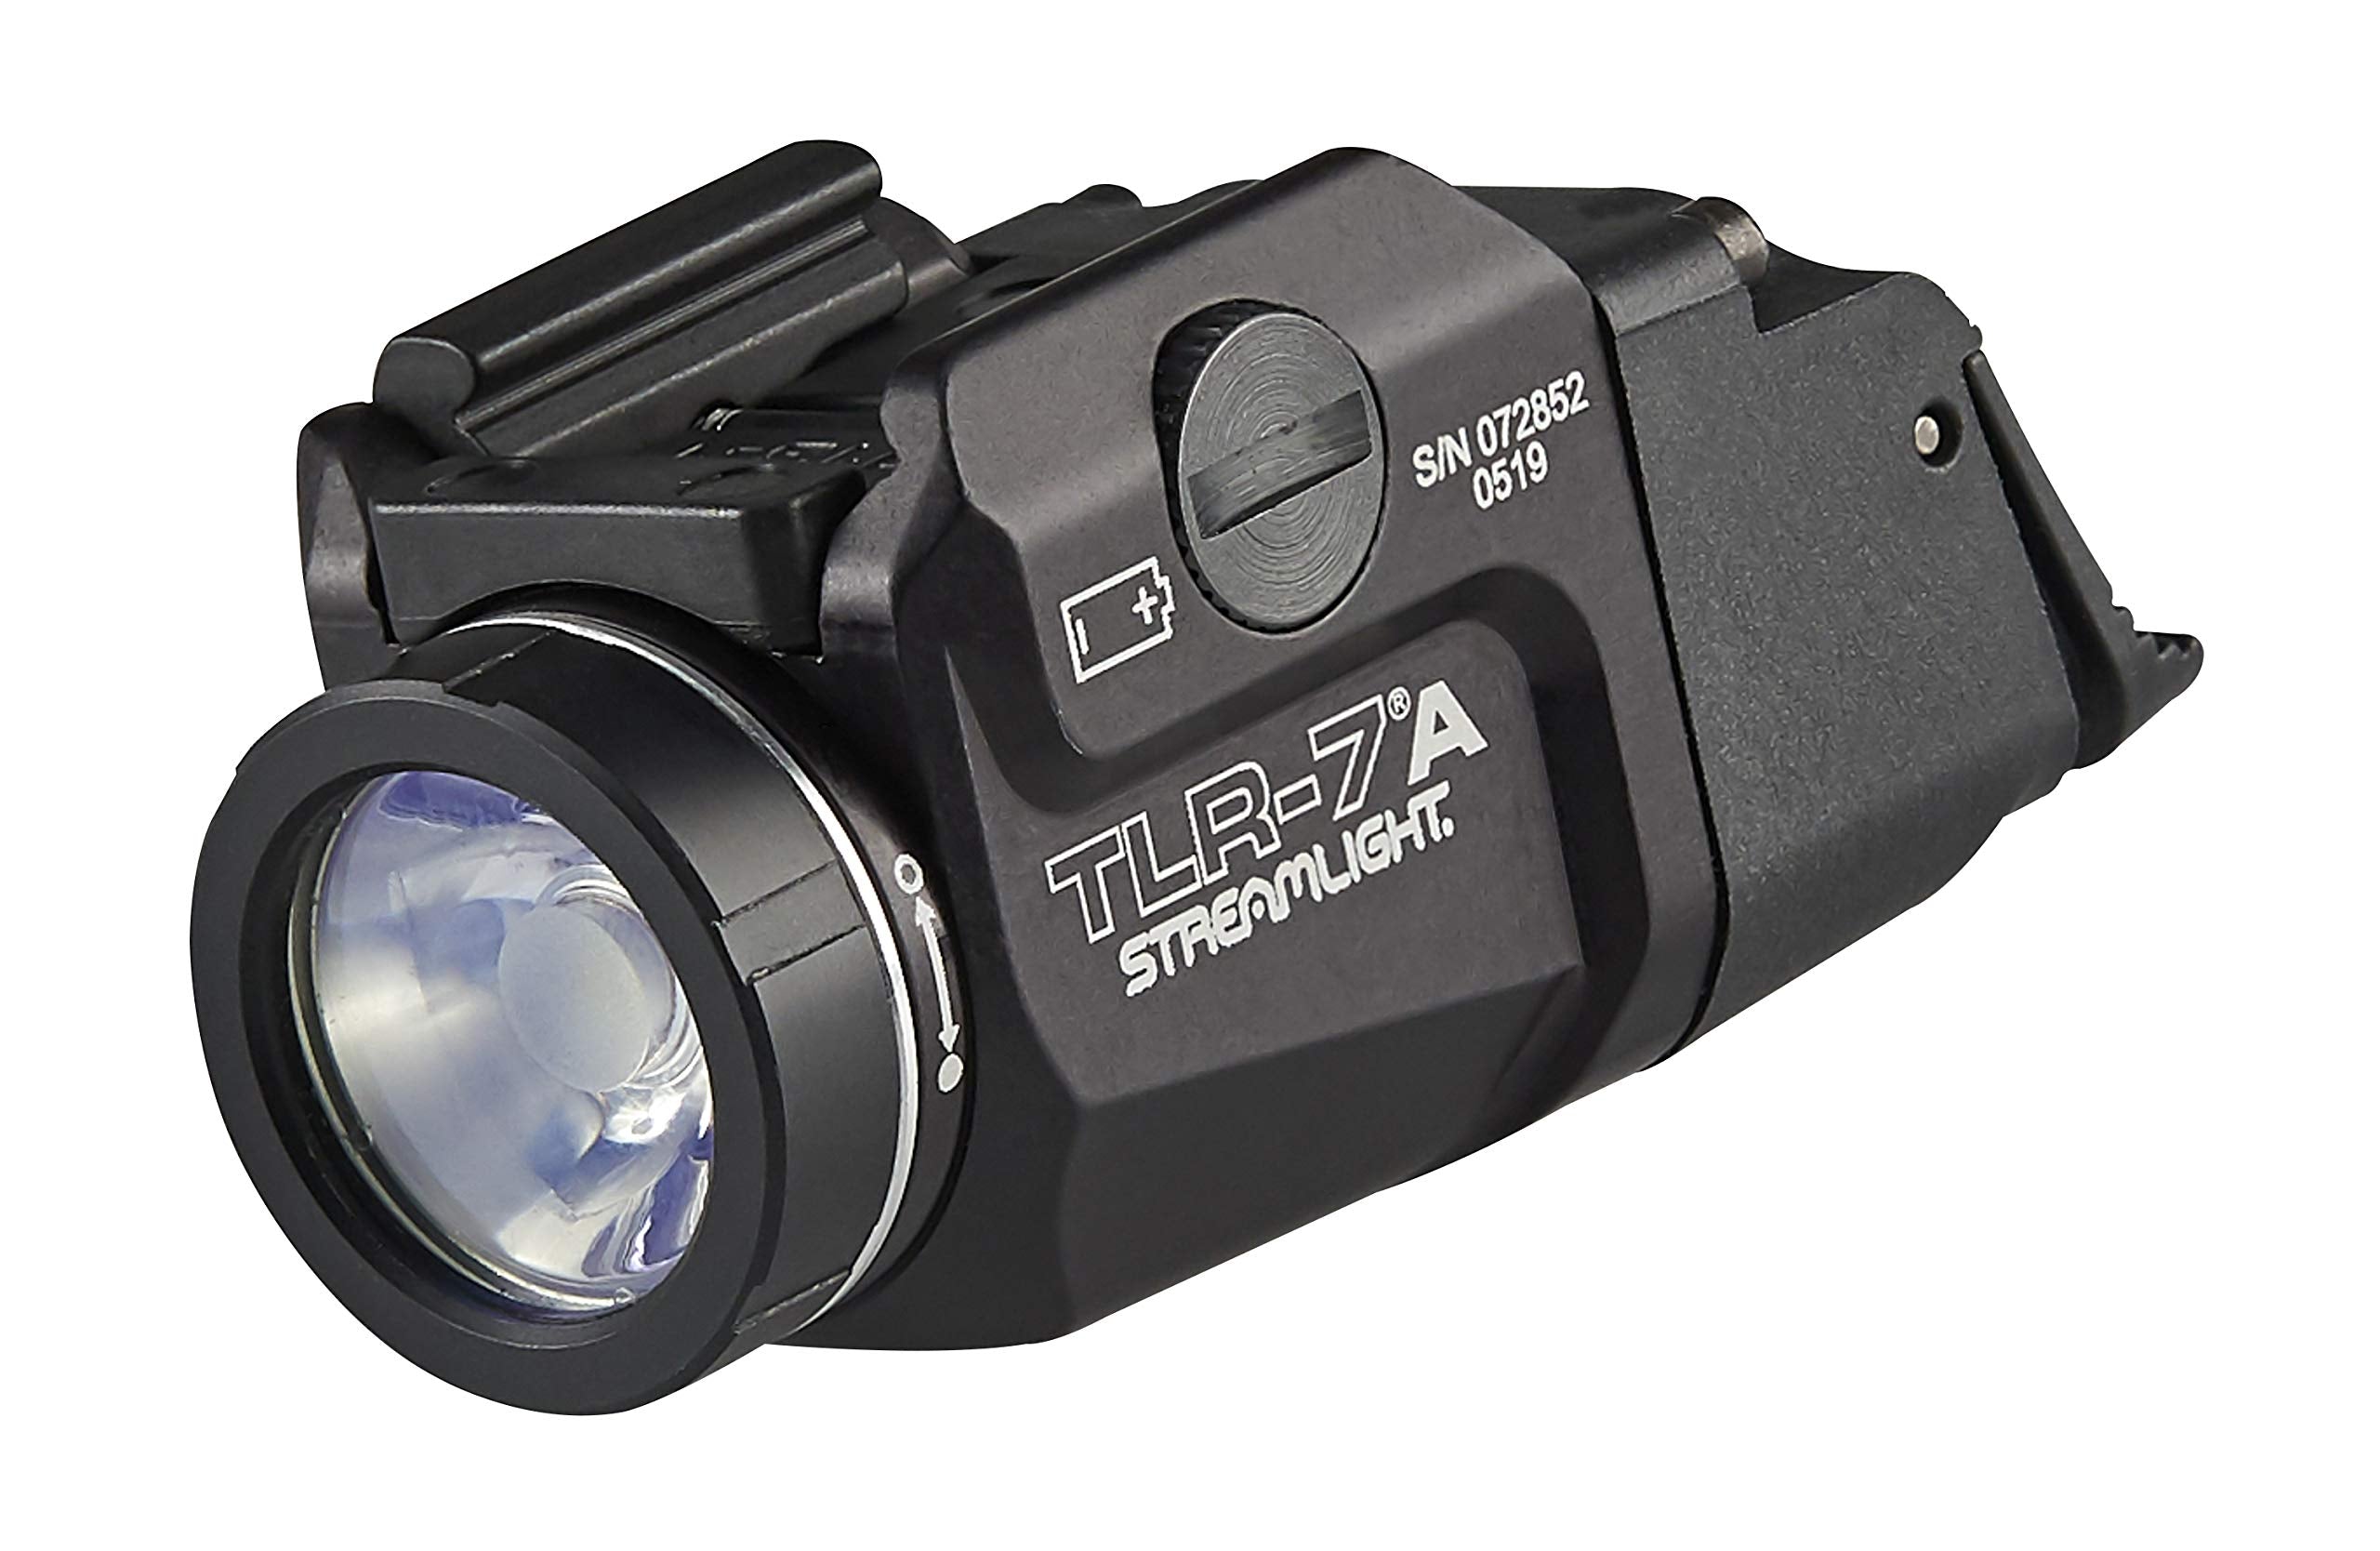 The Best Laser Sights for STI Firearms